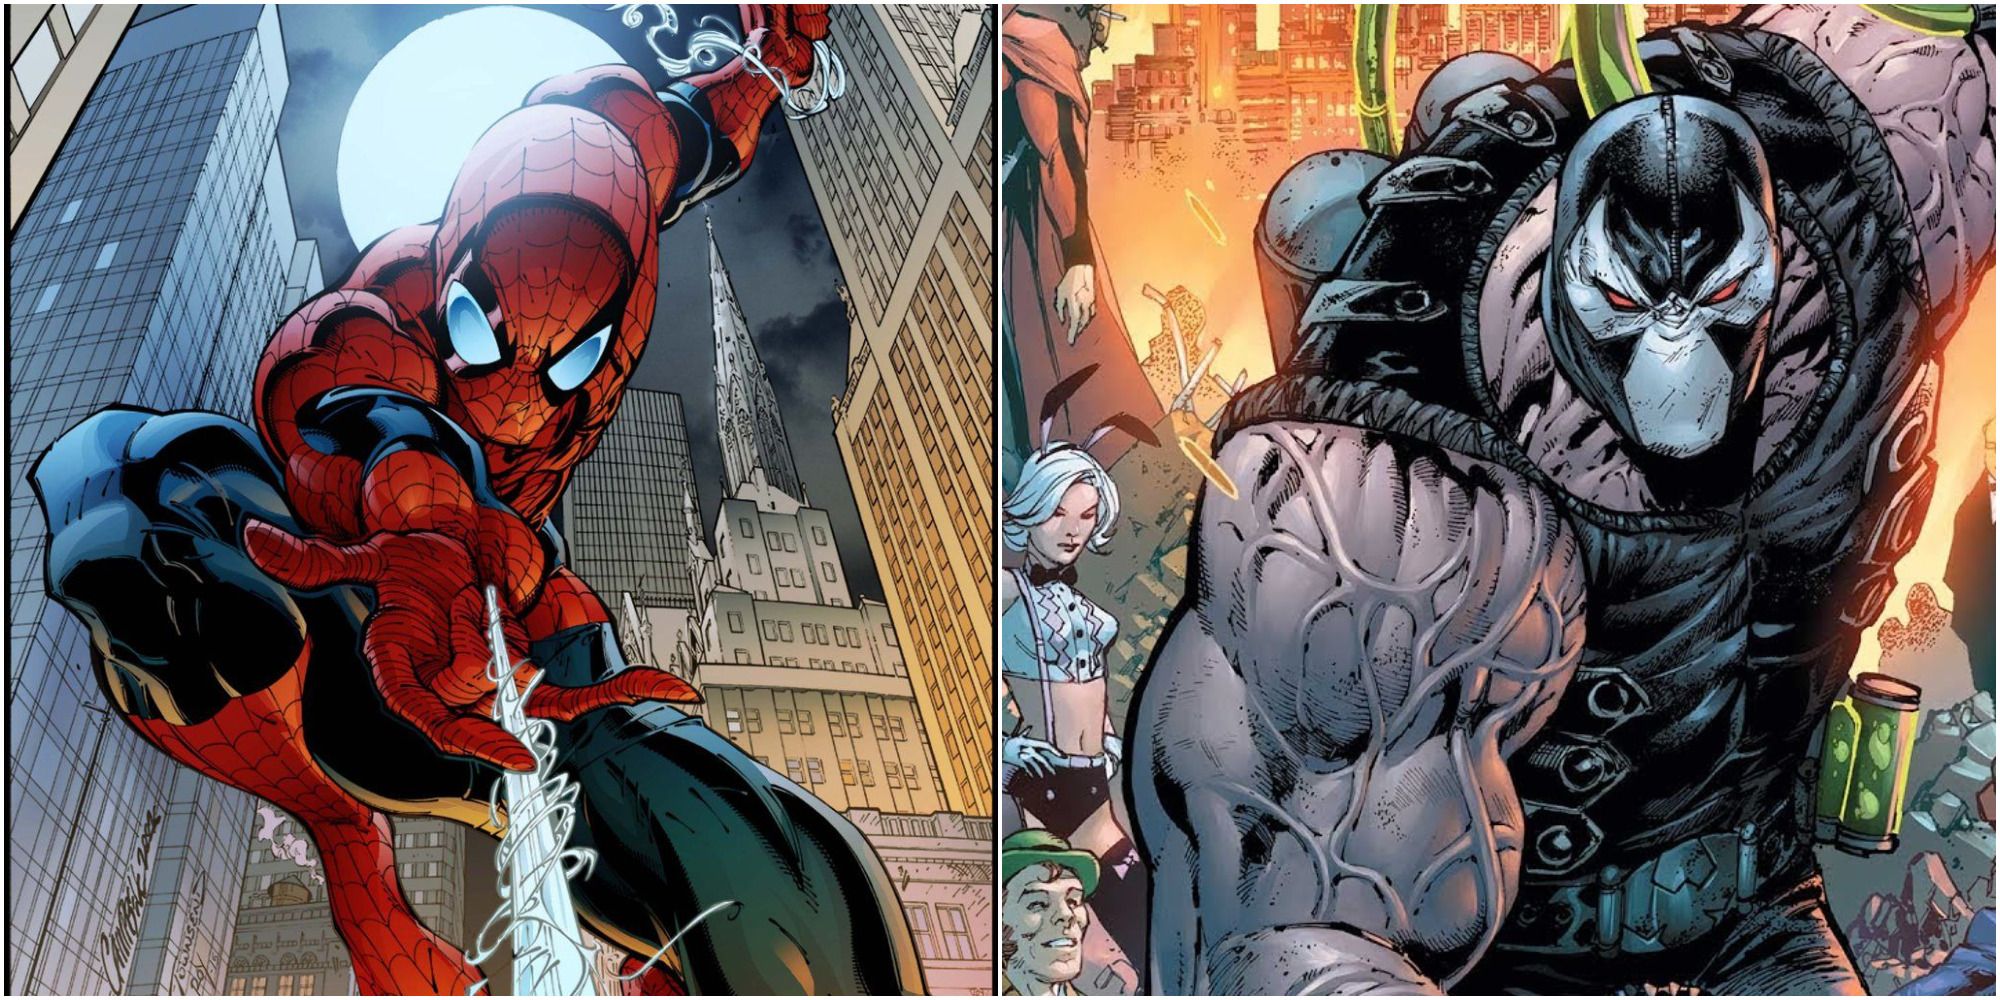 Spider-Man VS Bane: Who Would Win?